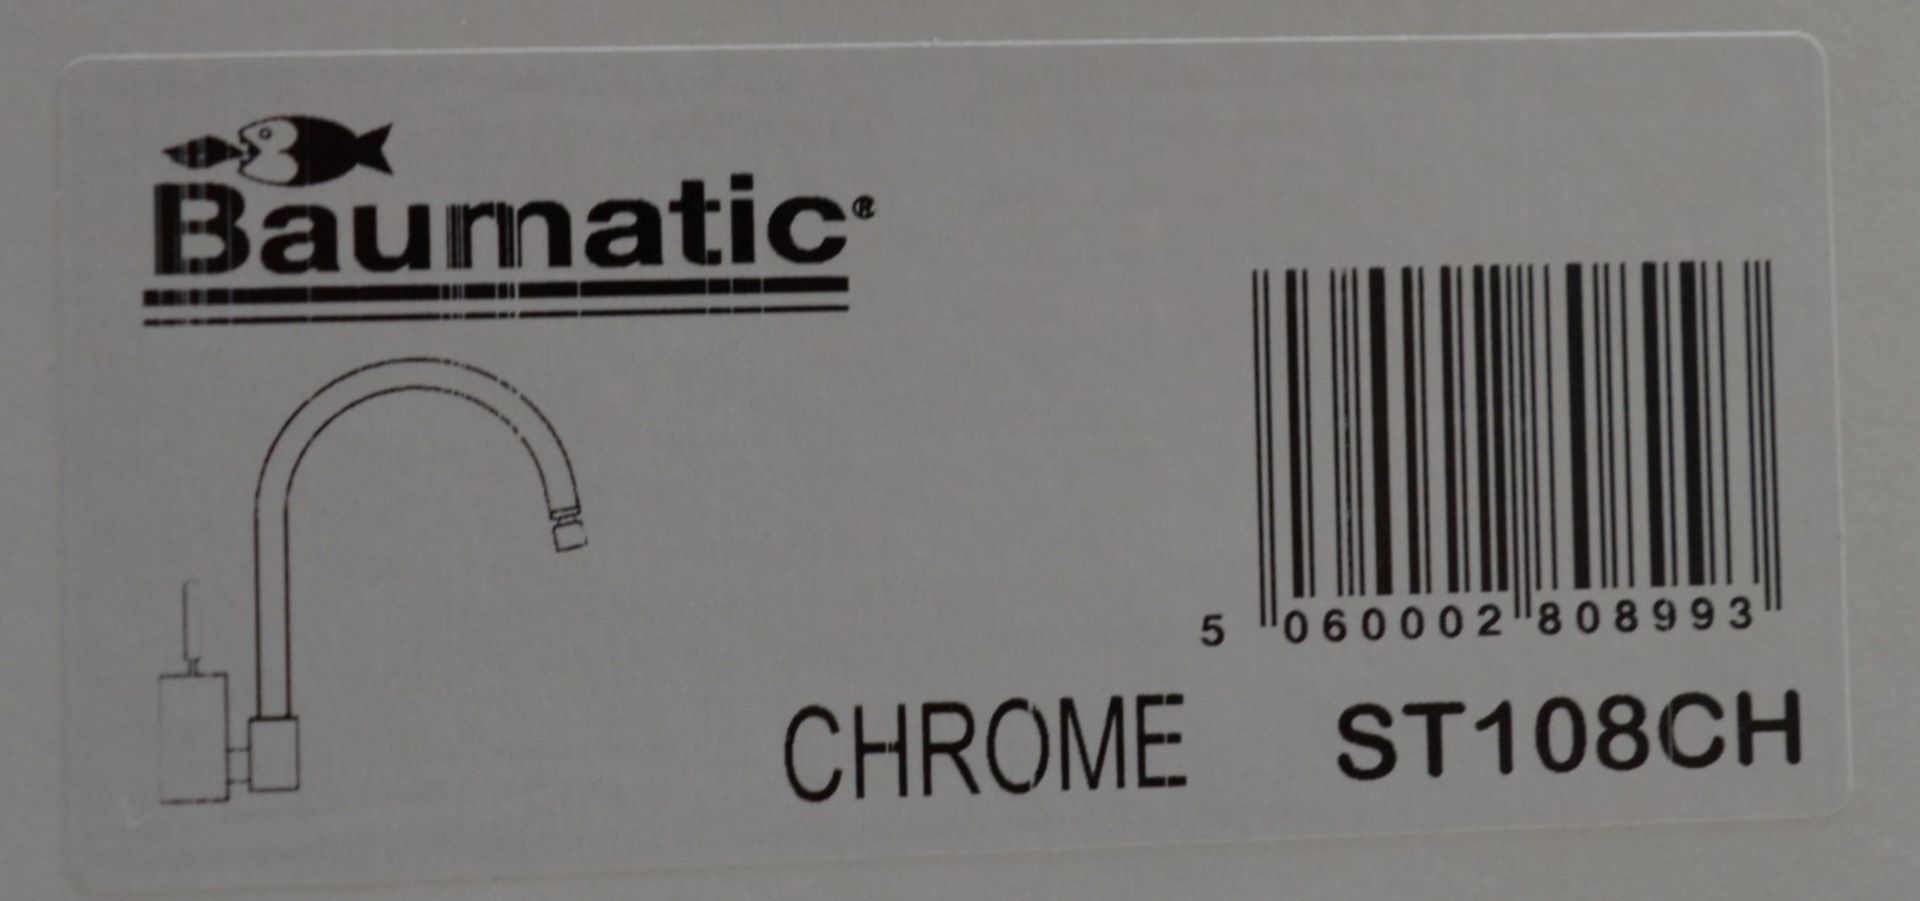 1 x Baumatic ST108CH Avalon Mixer Tap in Chrome – NEW & BOXED – CL053 – Location: Altrincham - Image 6 of 7